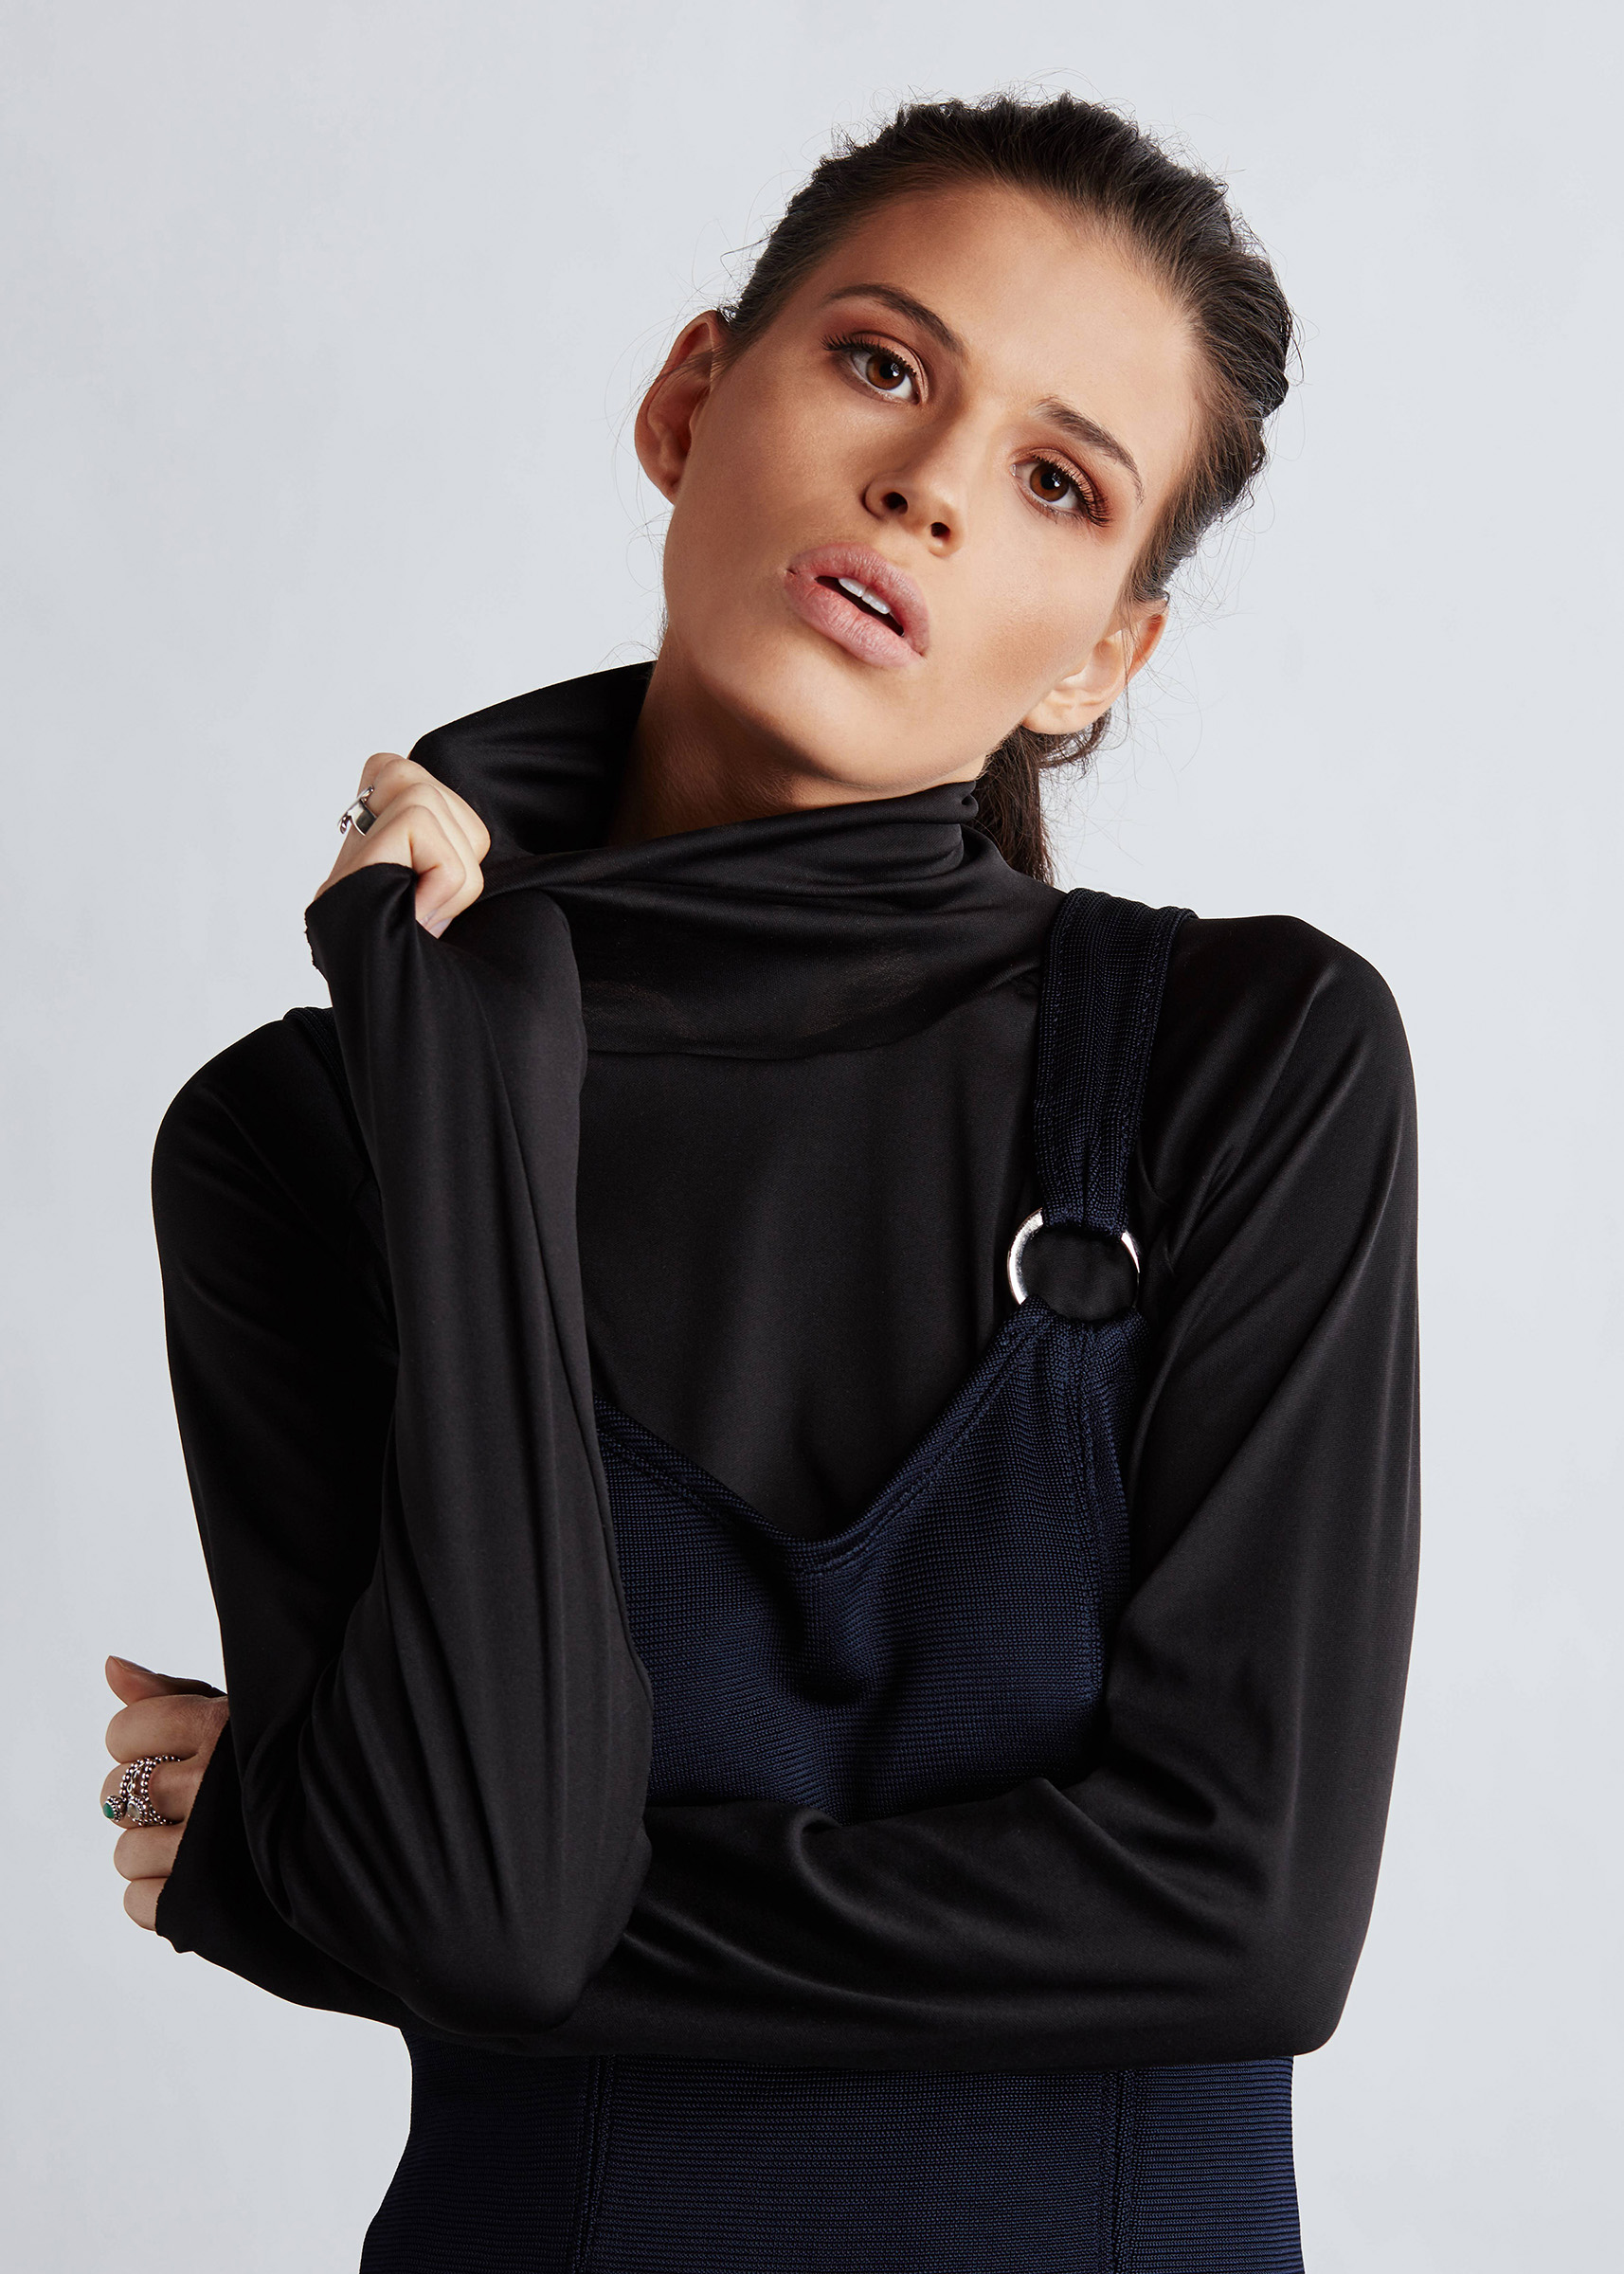 Studio fashion photography of female model wearing black jumper and overalls pulling on collar